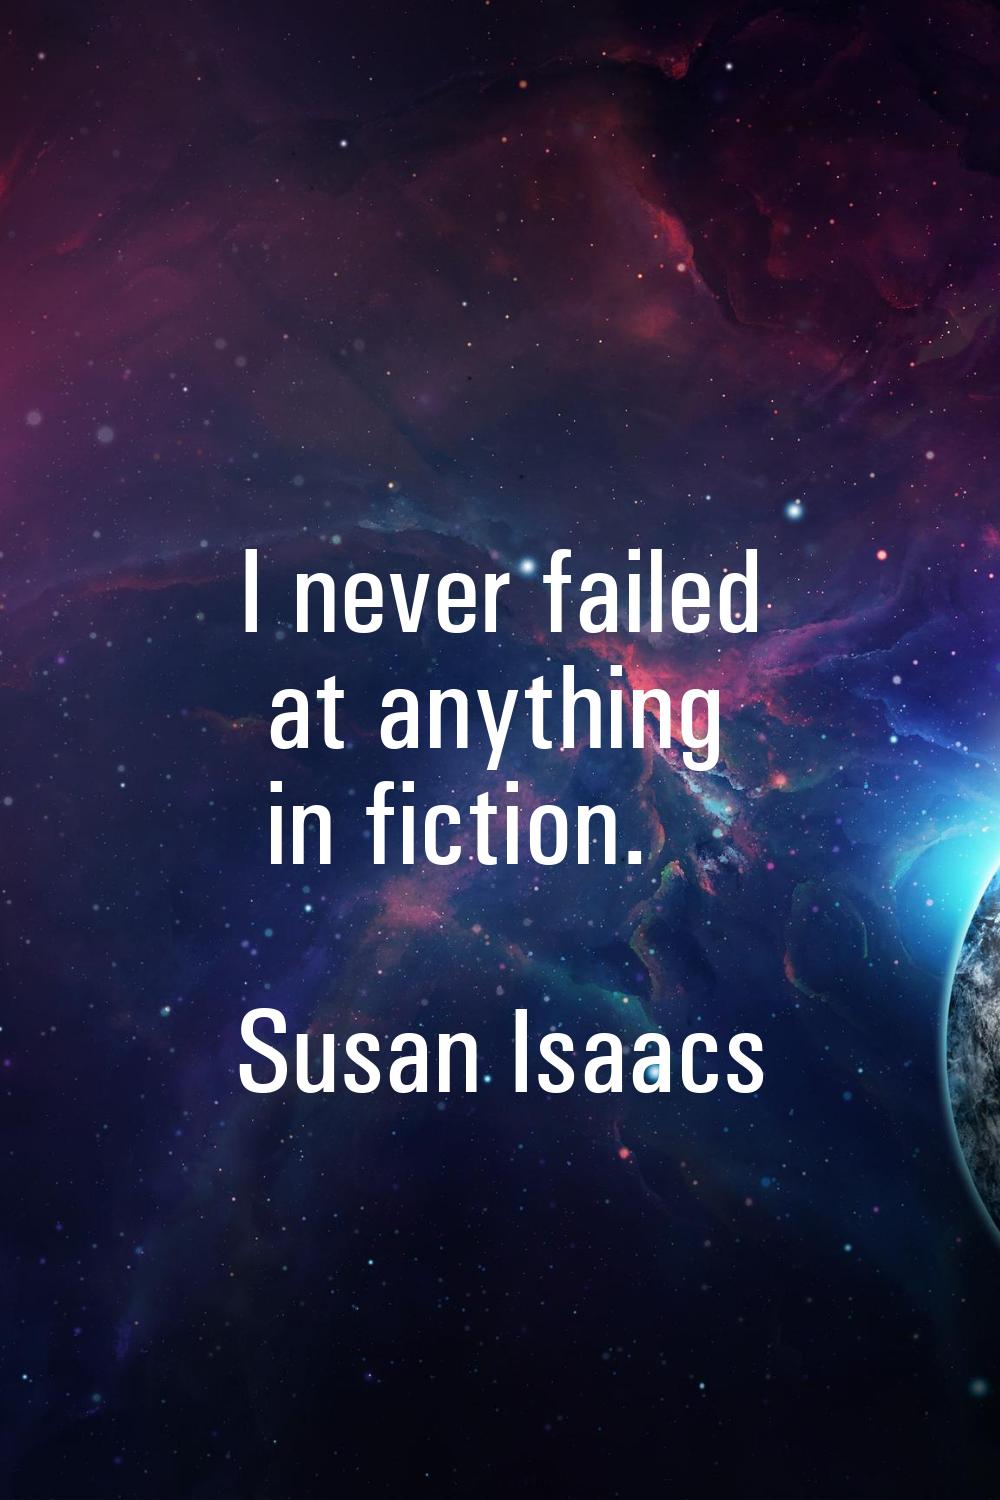 I never failed at anything in fiction.